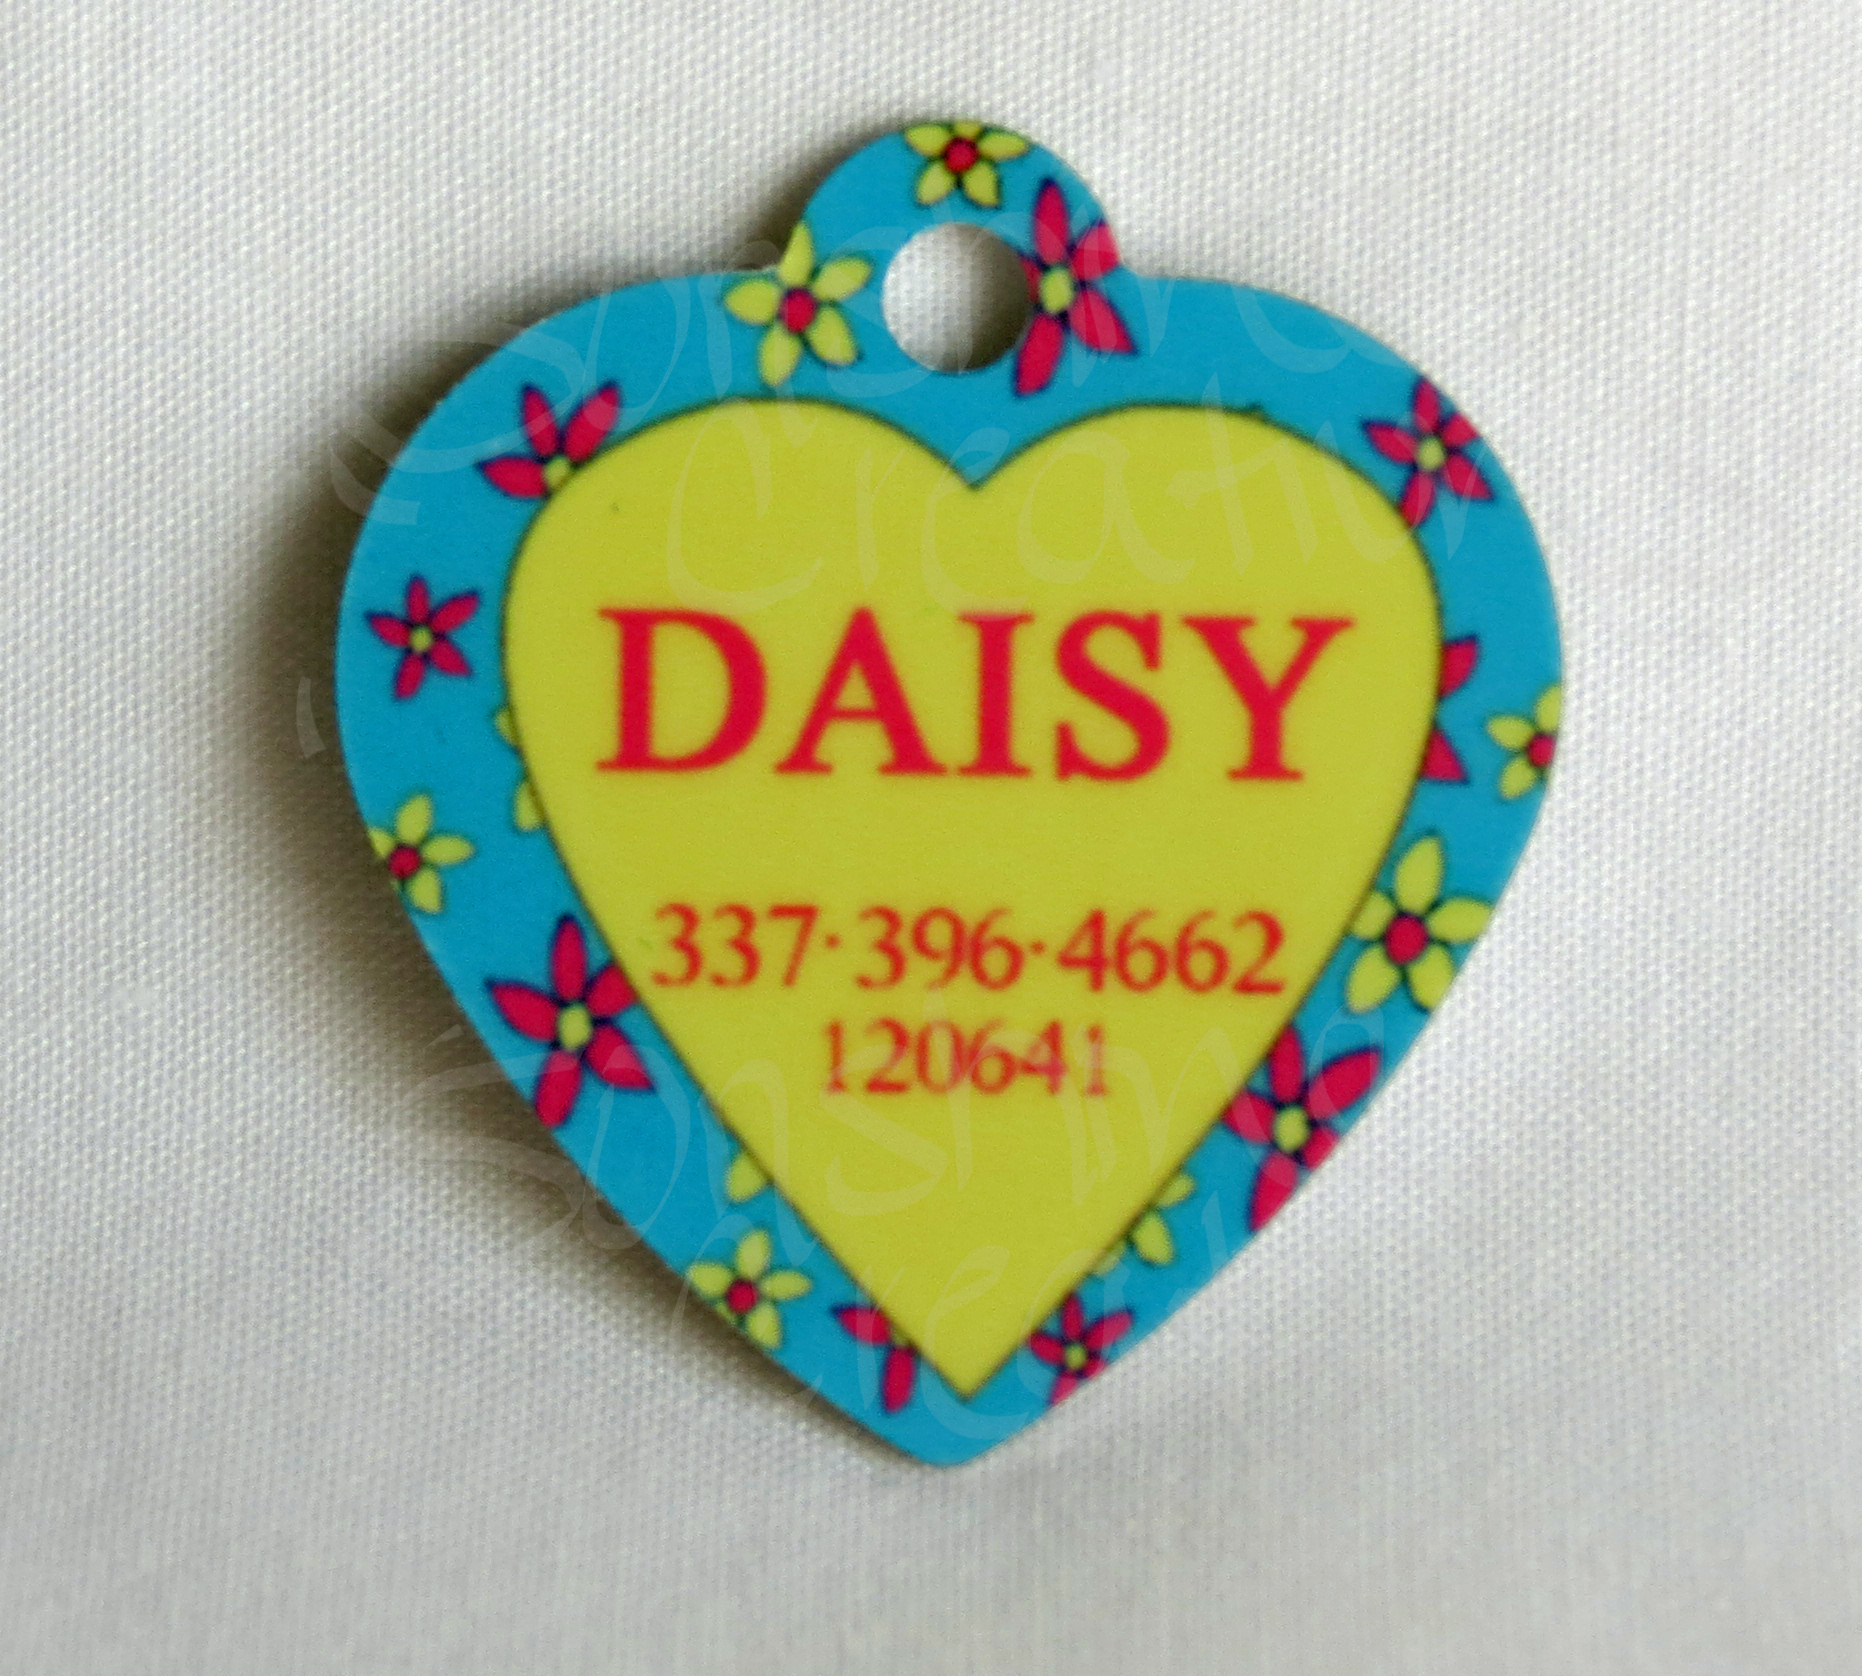 Heart Pet ID Tag made with sublimation printing